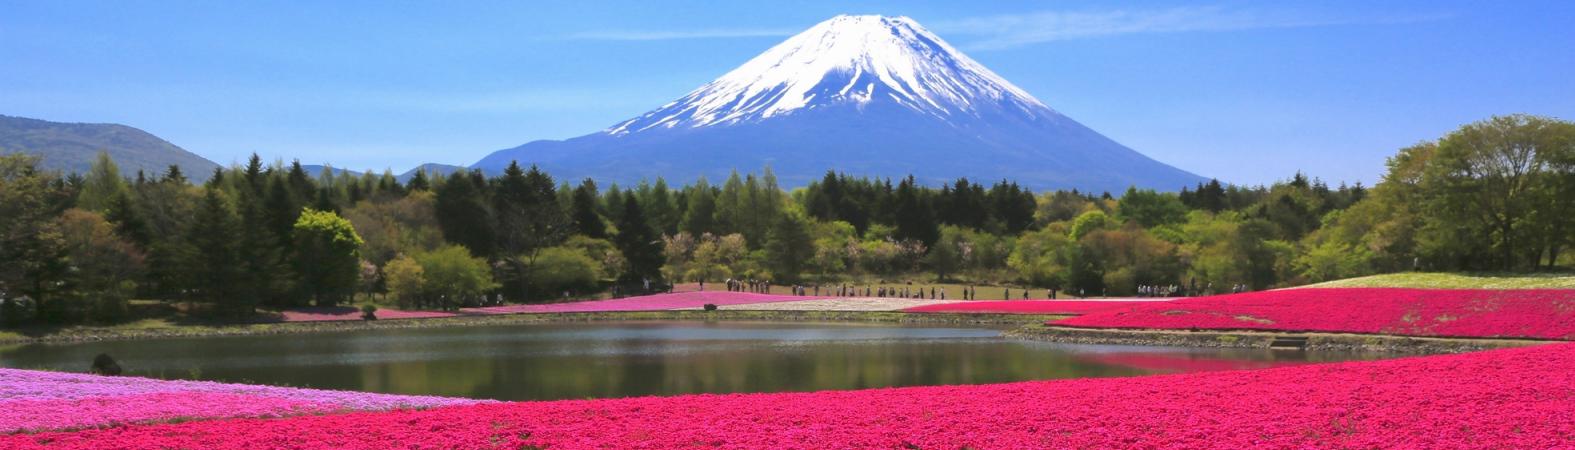 Japan Travel Experts Specializing in Creating Tailor-Made Itineraries